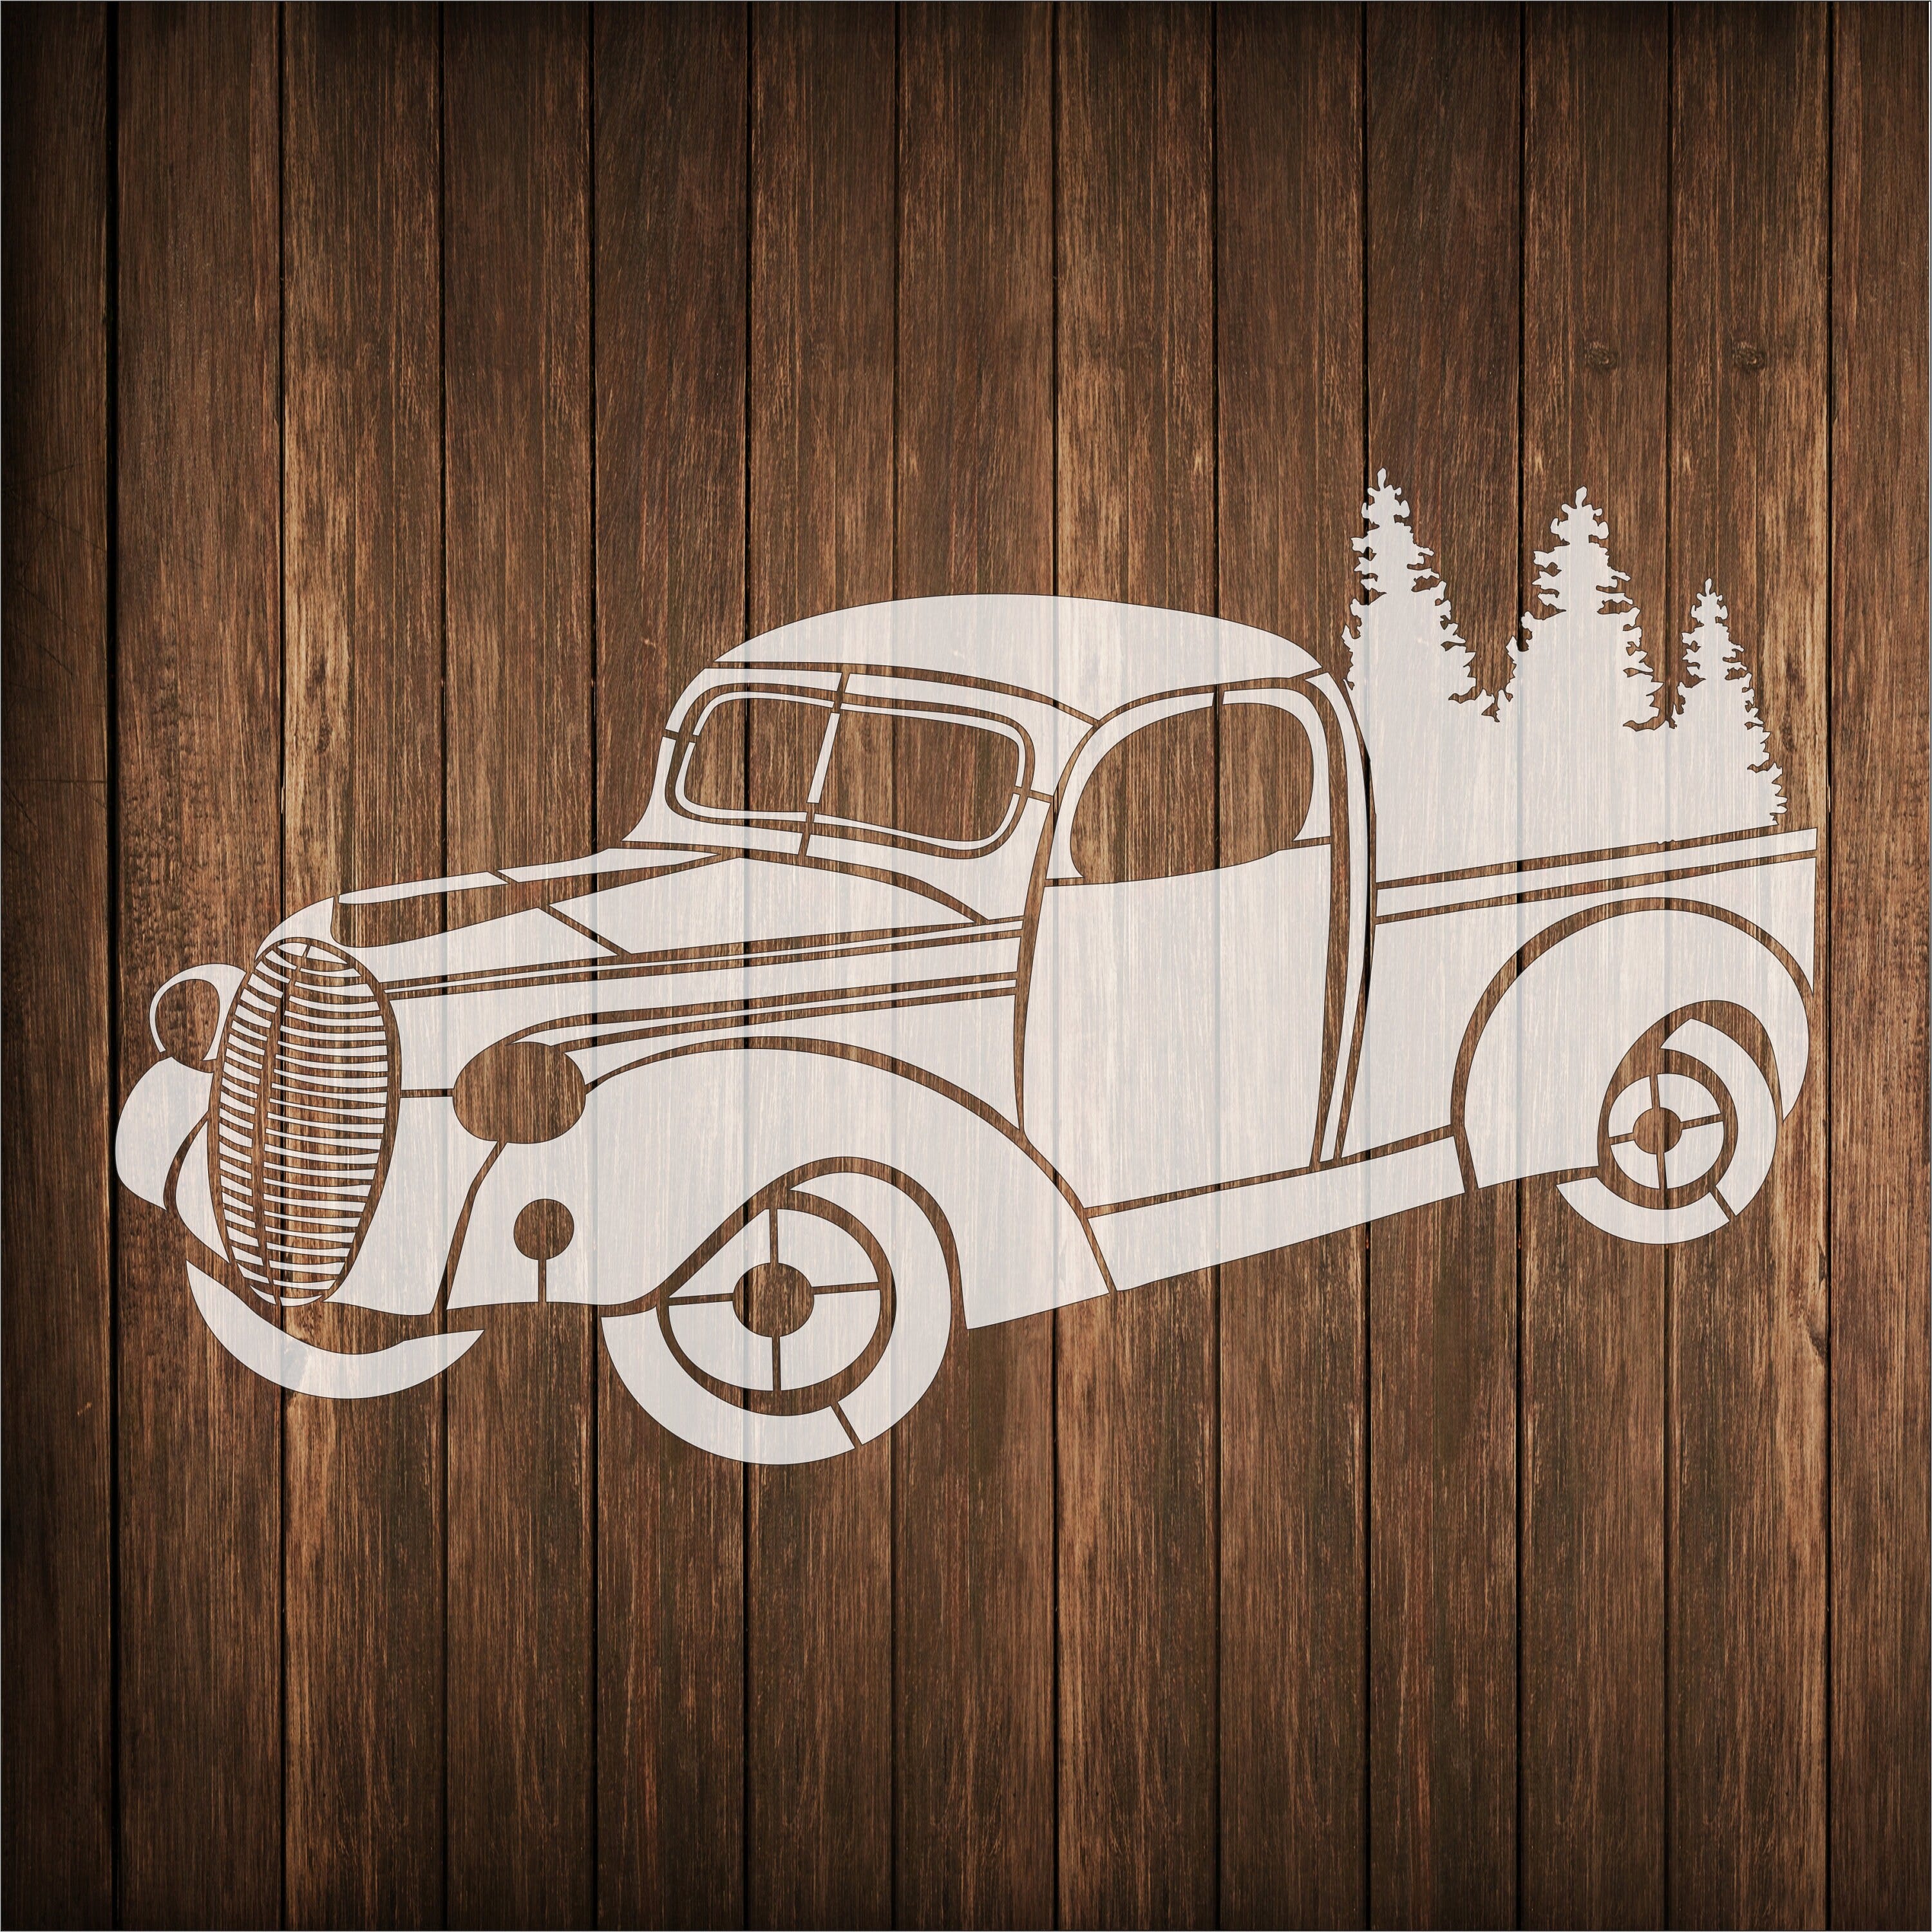 Old truck with pine trees stencil, old truck stencil, old truck Christmas stencil